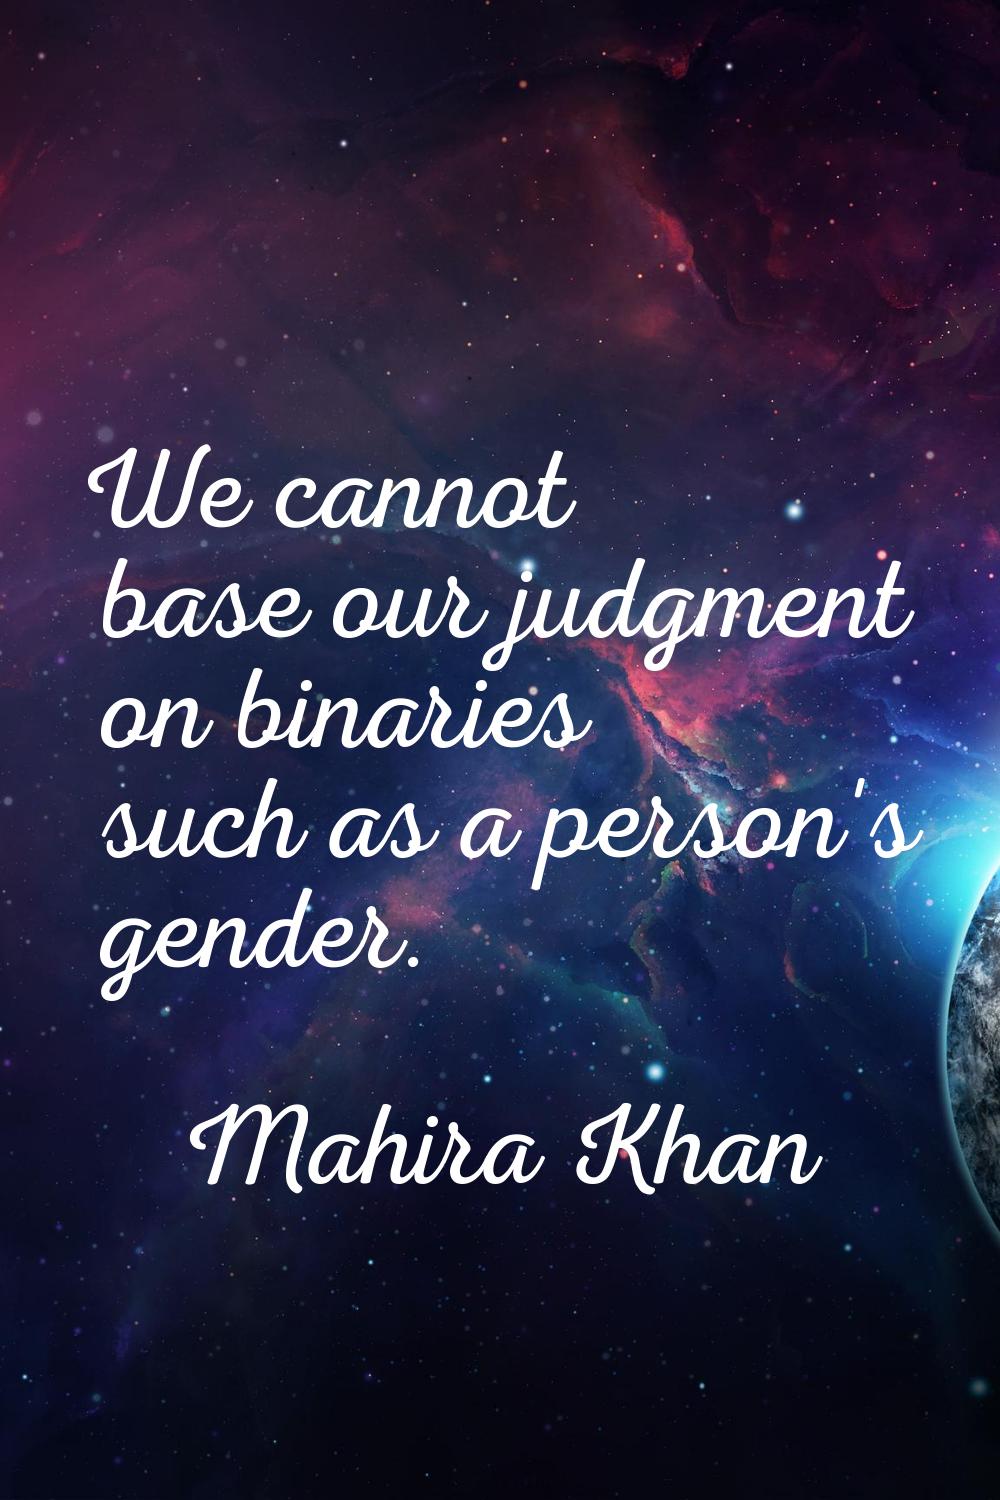 We cannot base our judgment on binaries such as a person's gender.